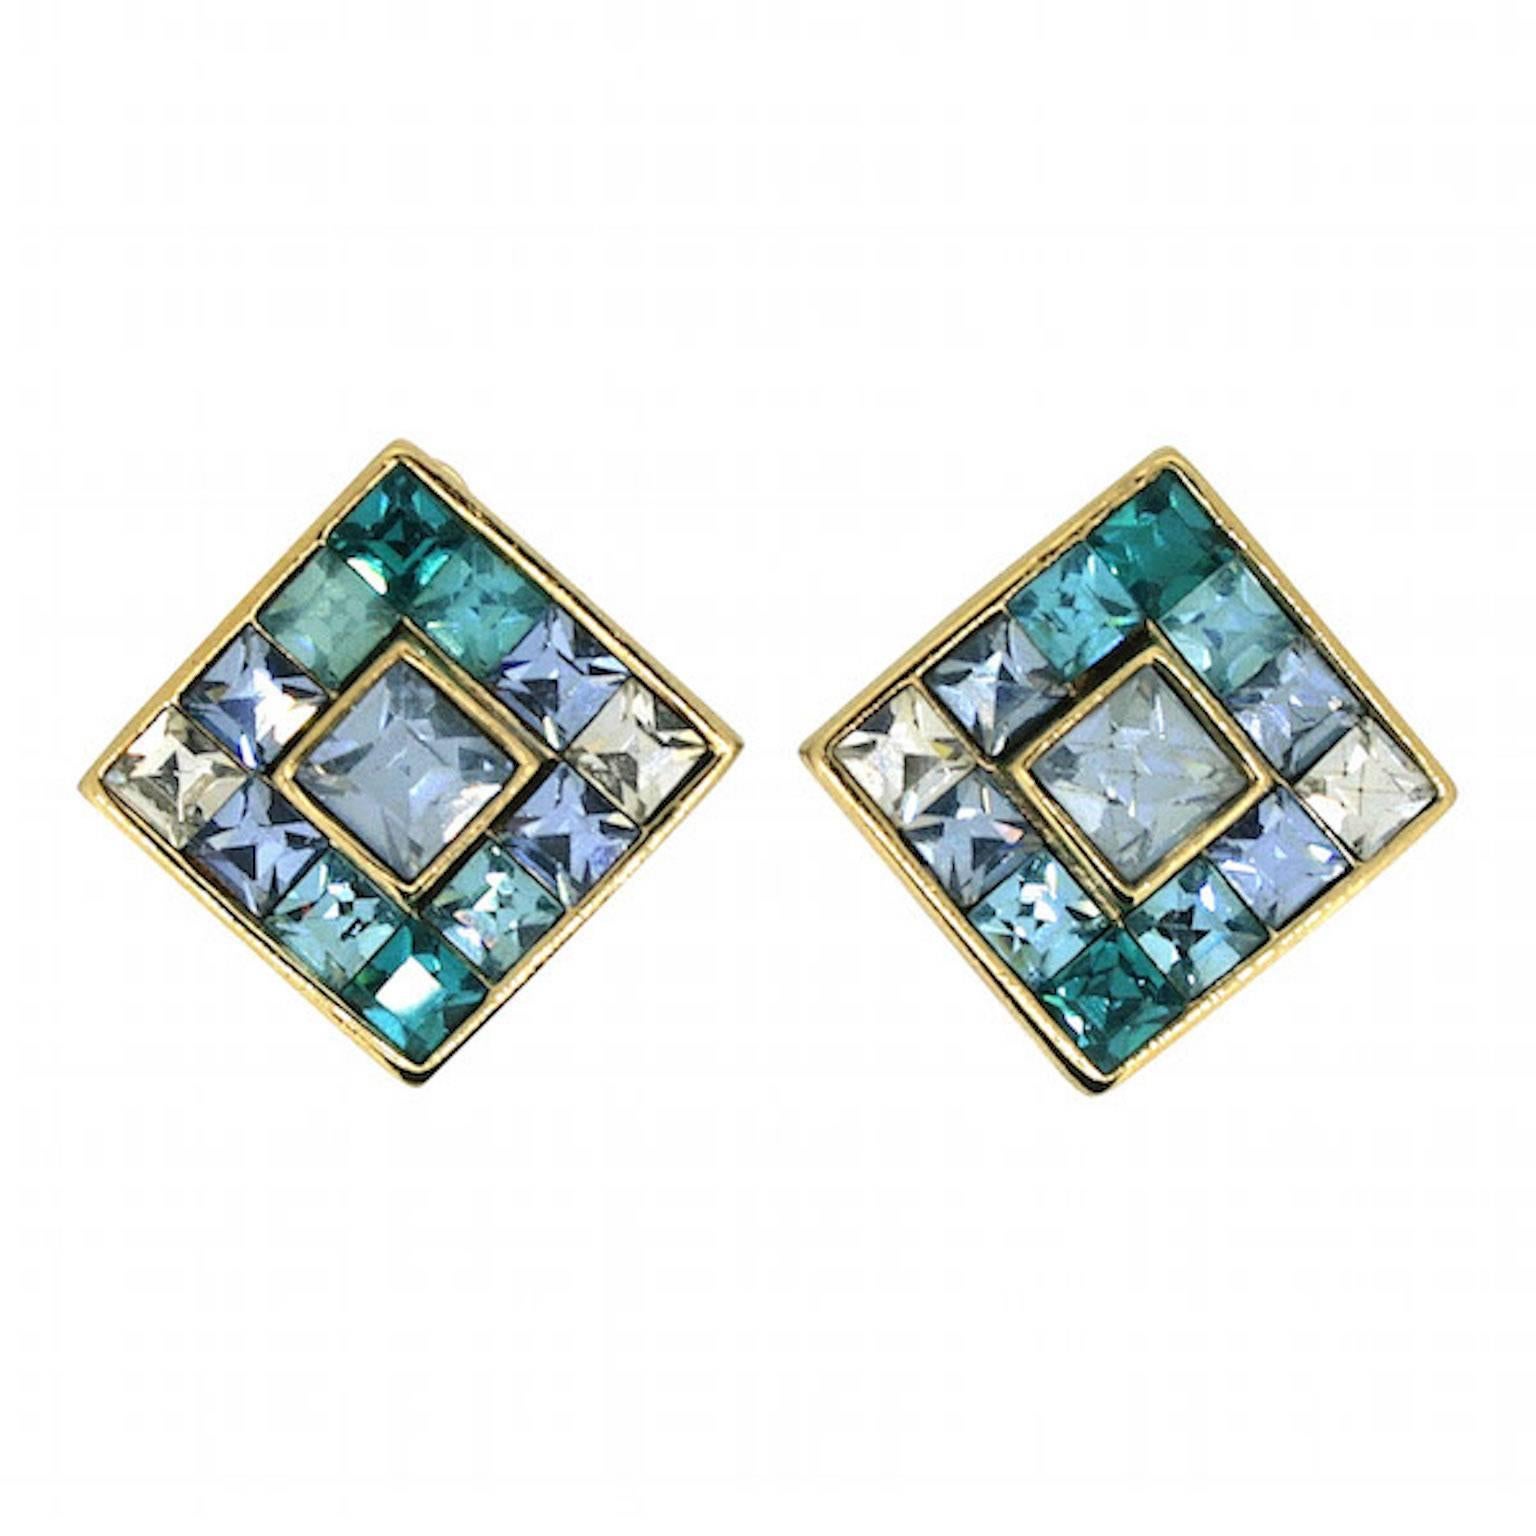 Givenchy 1980s Blue and Green Rhinestone Vintage Earrings For Sale